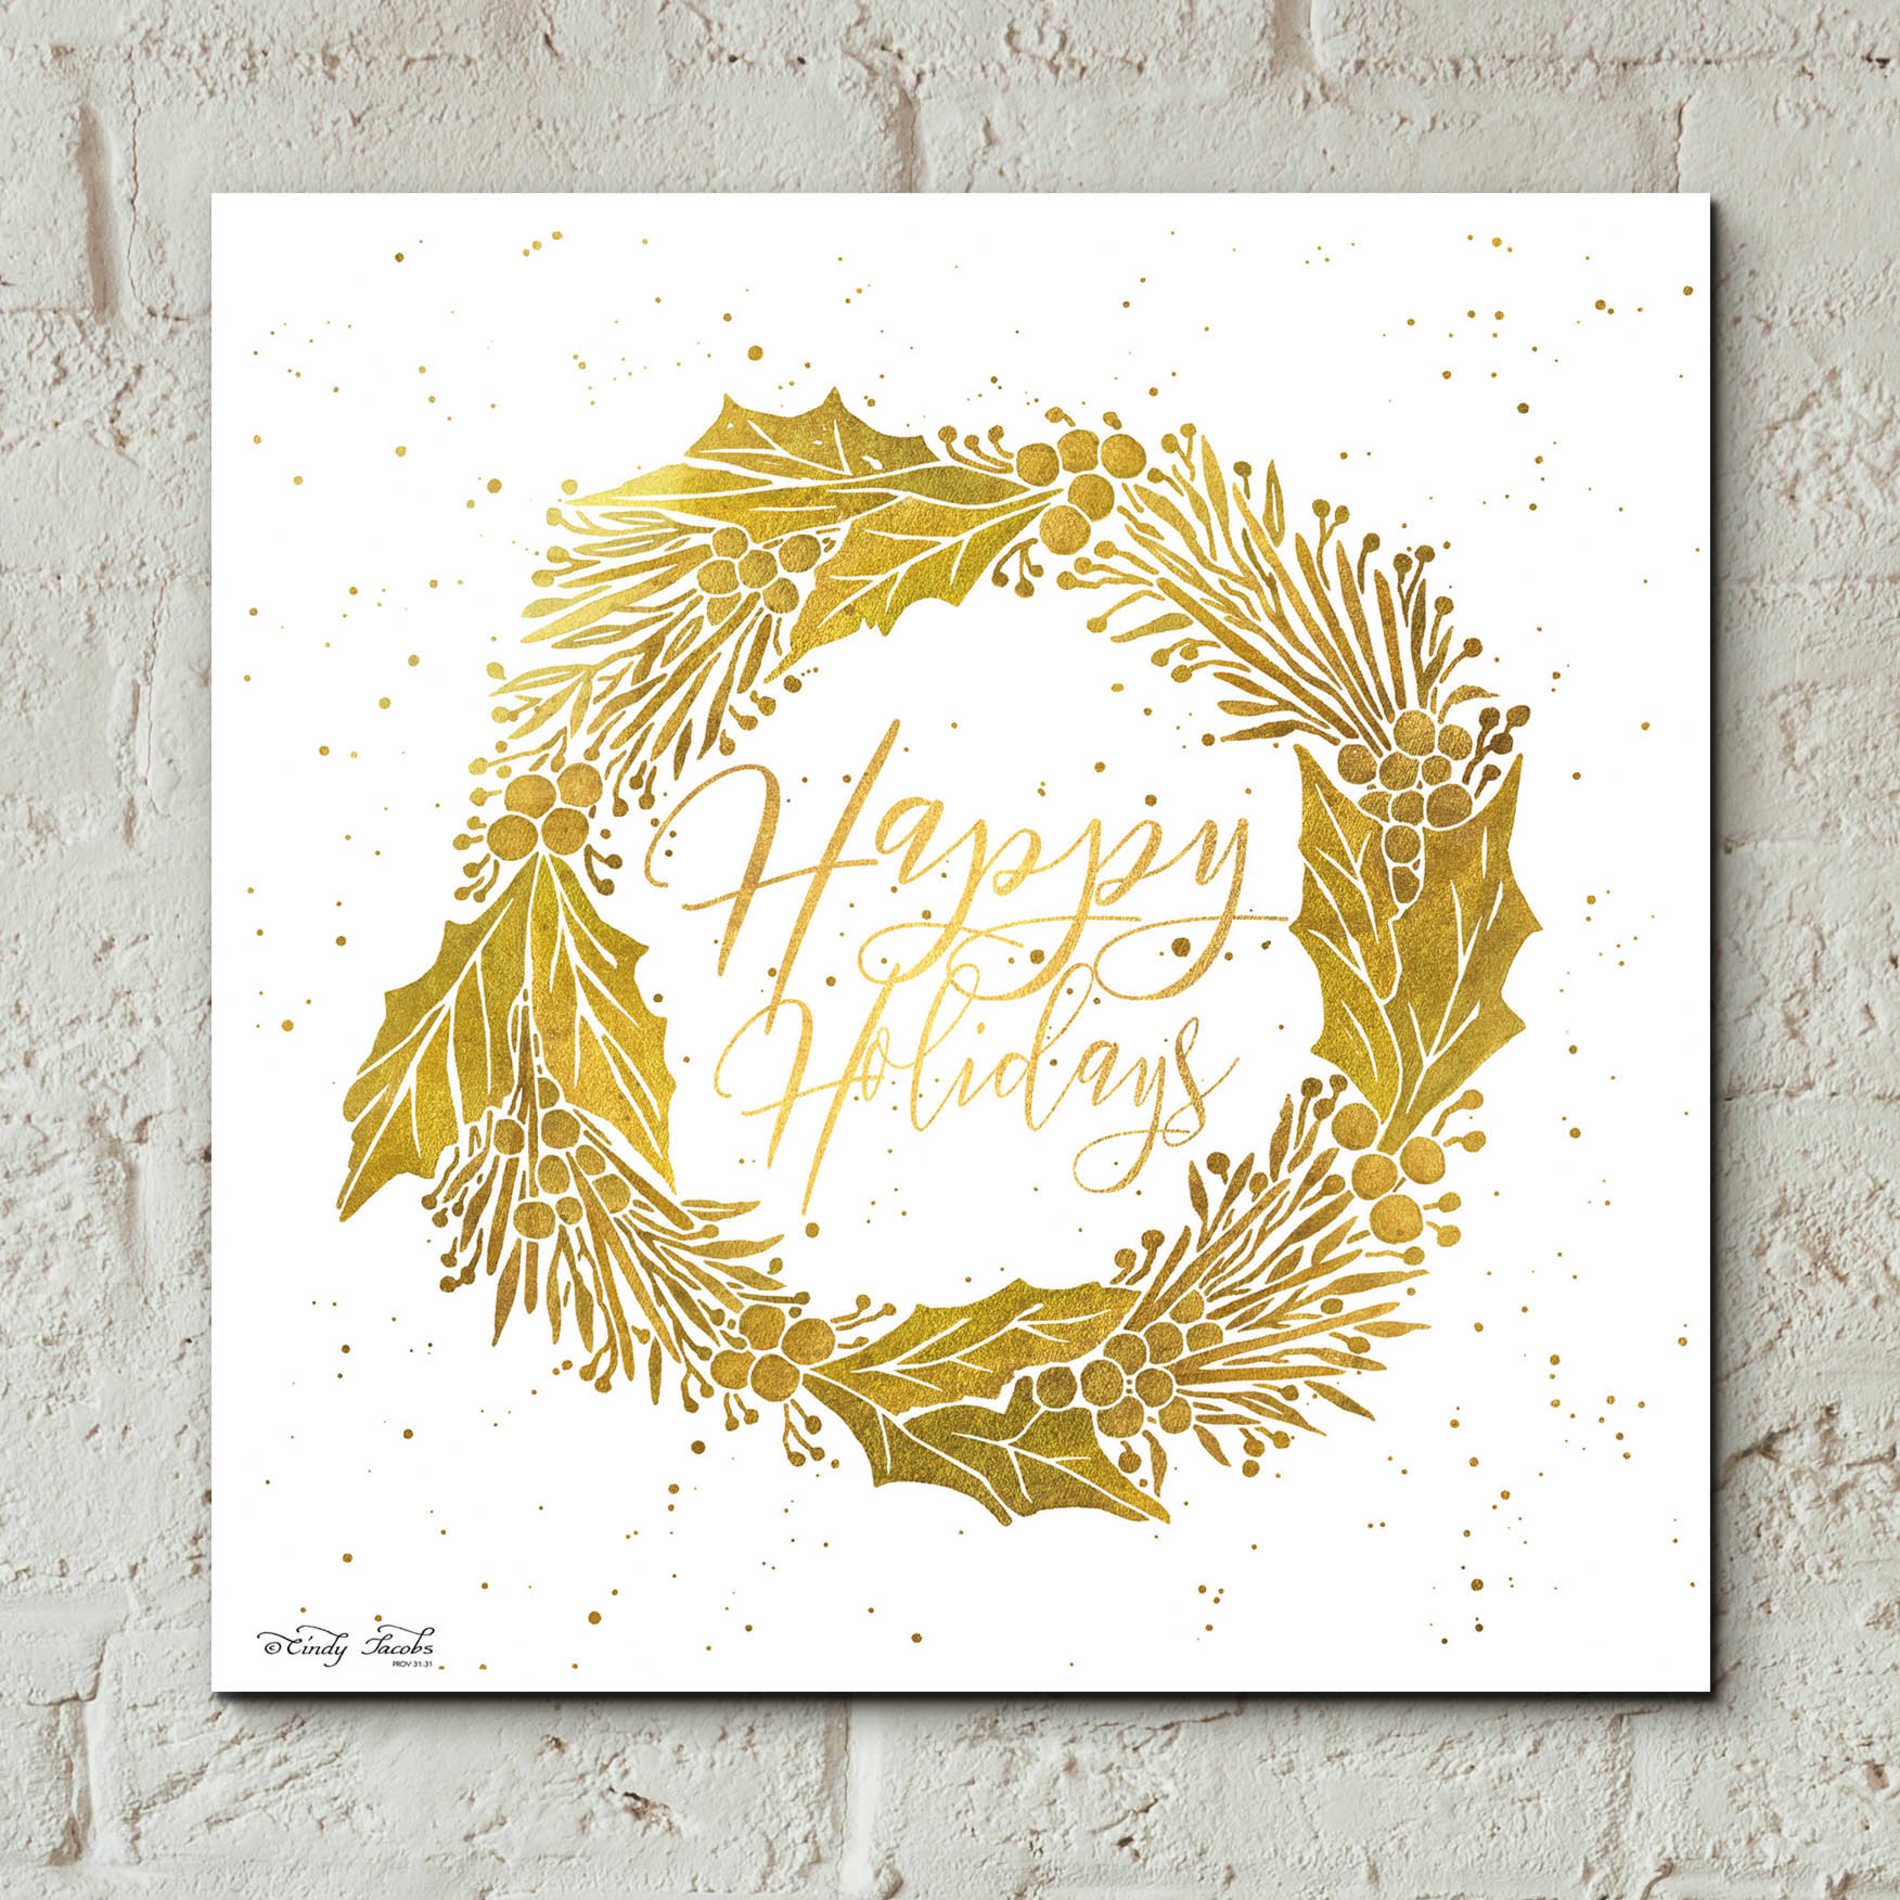 Epic Art 'Happy Holidays Golden Wreath' by Cindy Jacobs, Acrylic Glass Wall Art,12x12